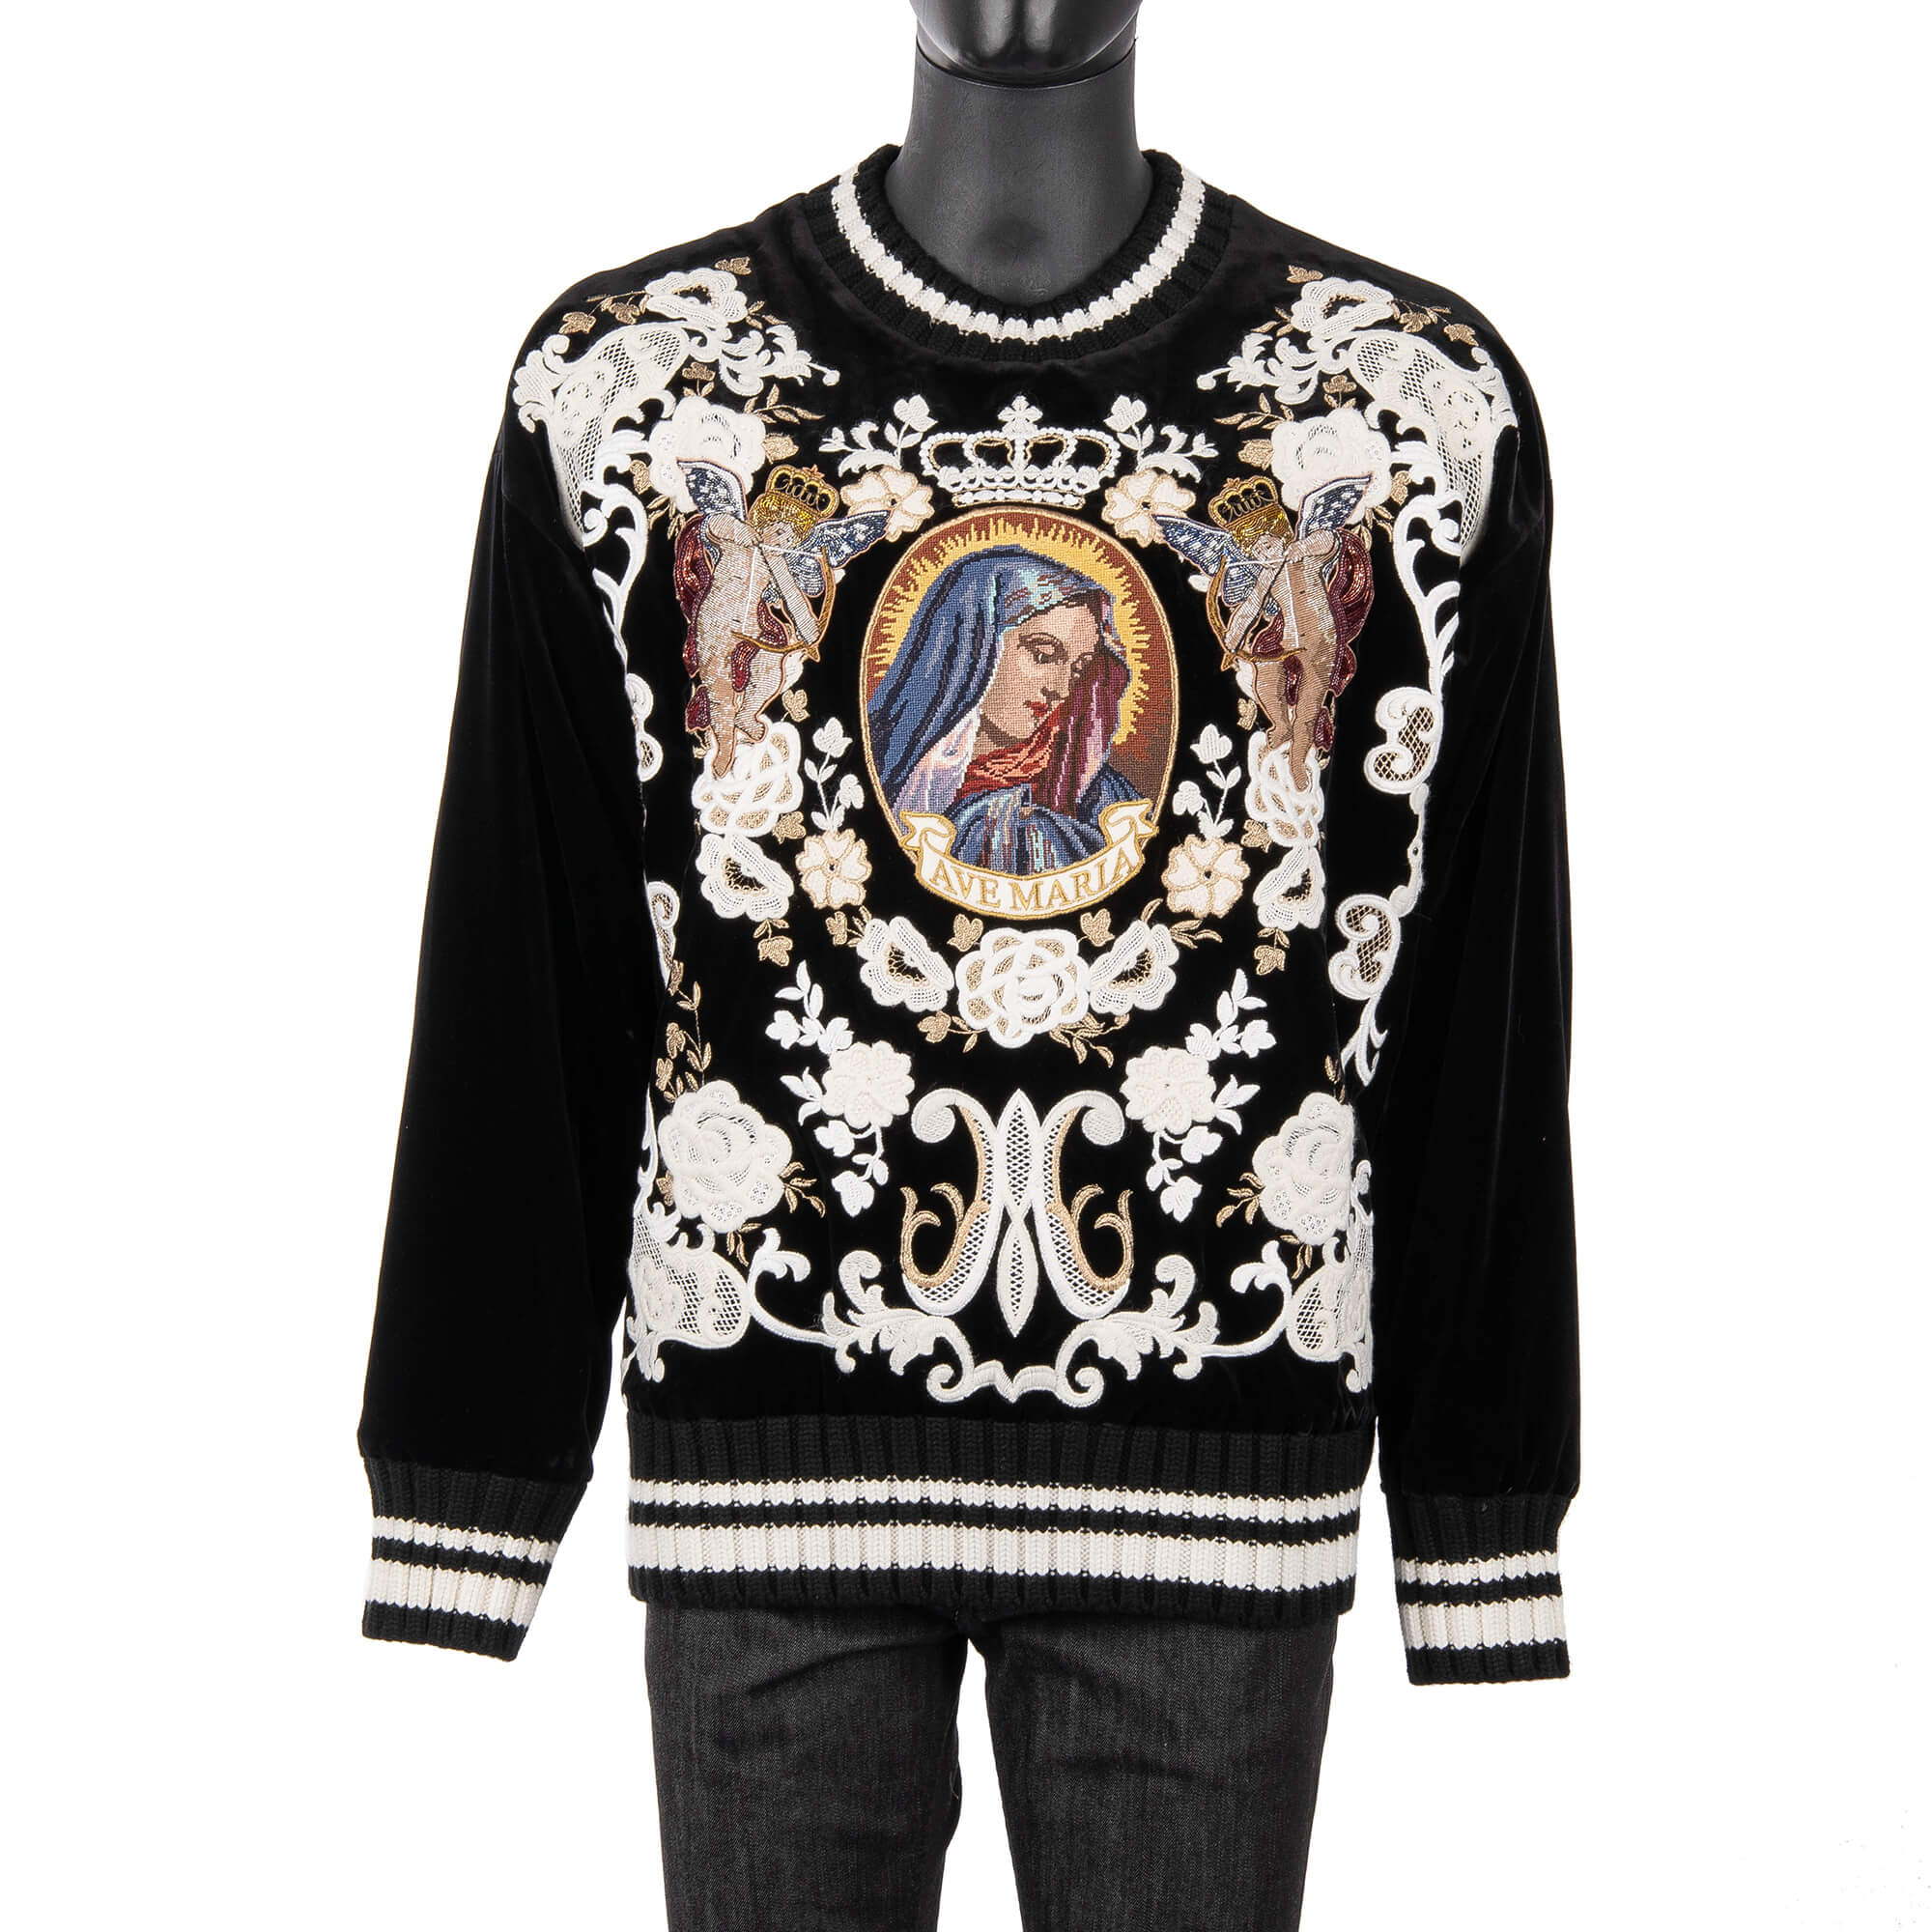 Velvet-Sweater-with-Angels-and-Santa-Maria-Embroidery-Black-White-1.jpg